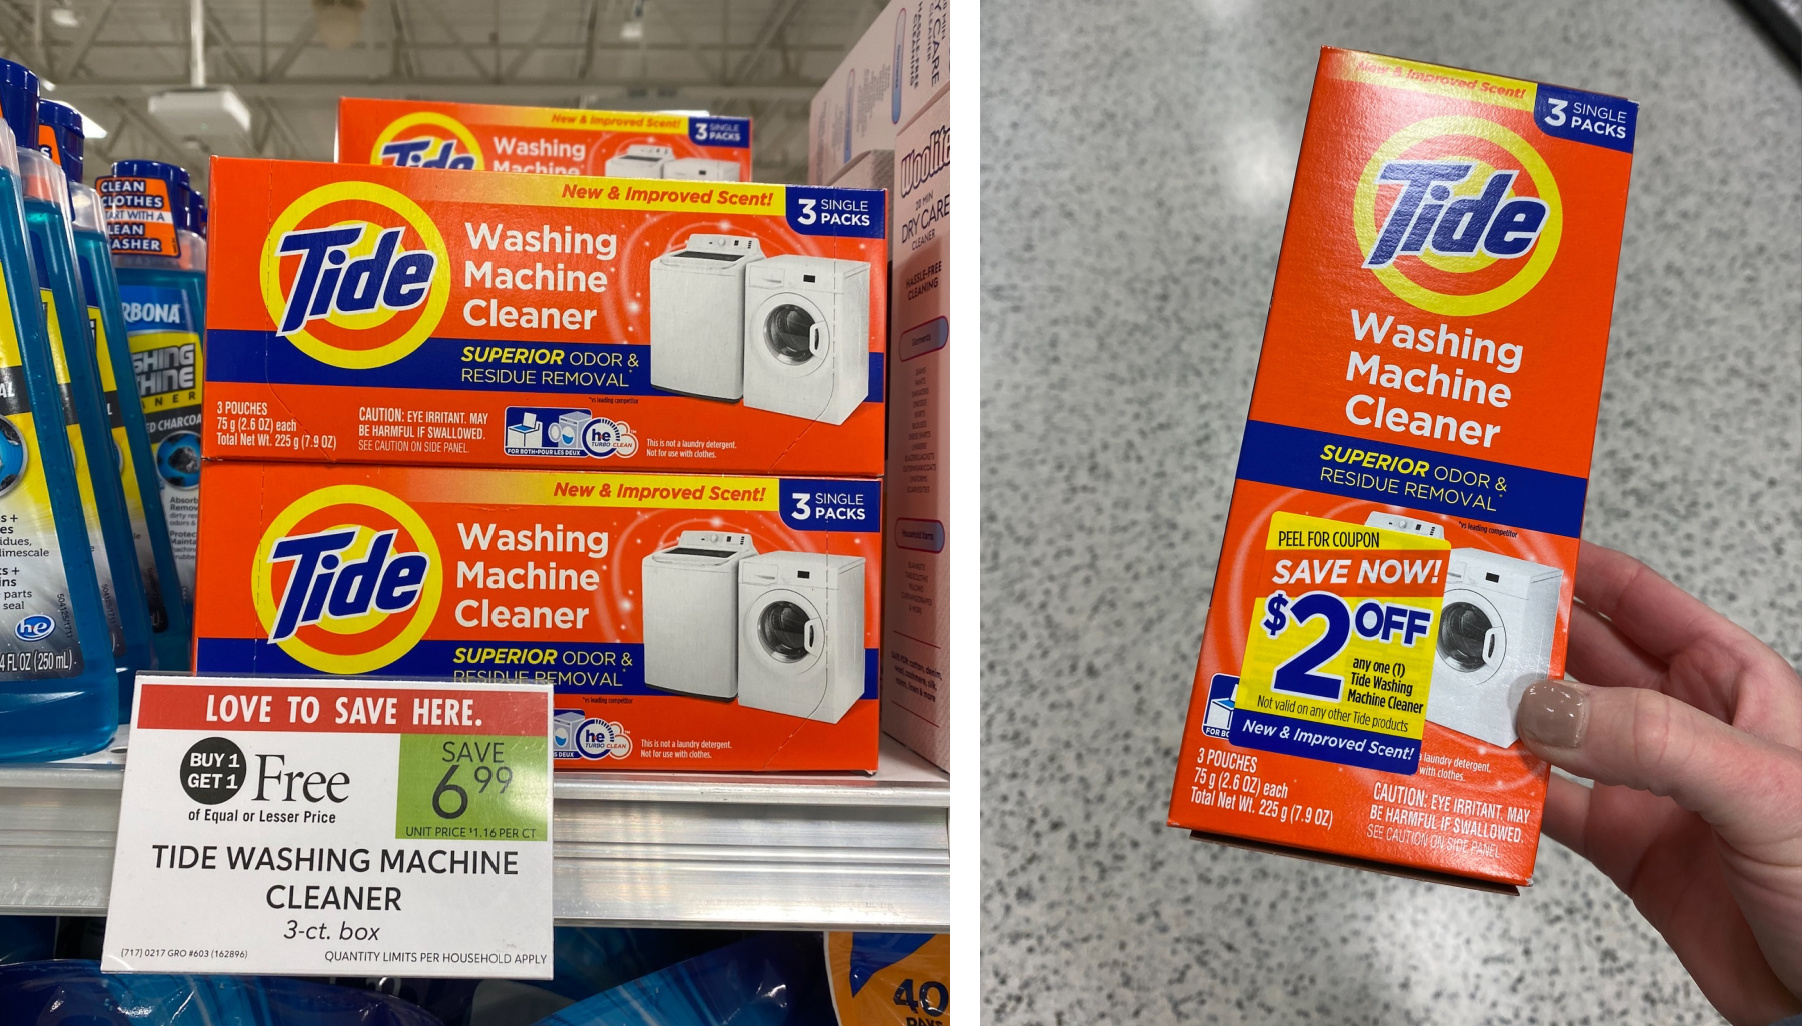 Tide Washing Machine Cleaner Just $1.40 At Publix on I Heart Publix 2